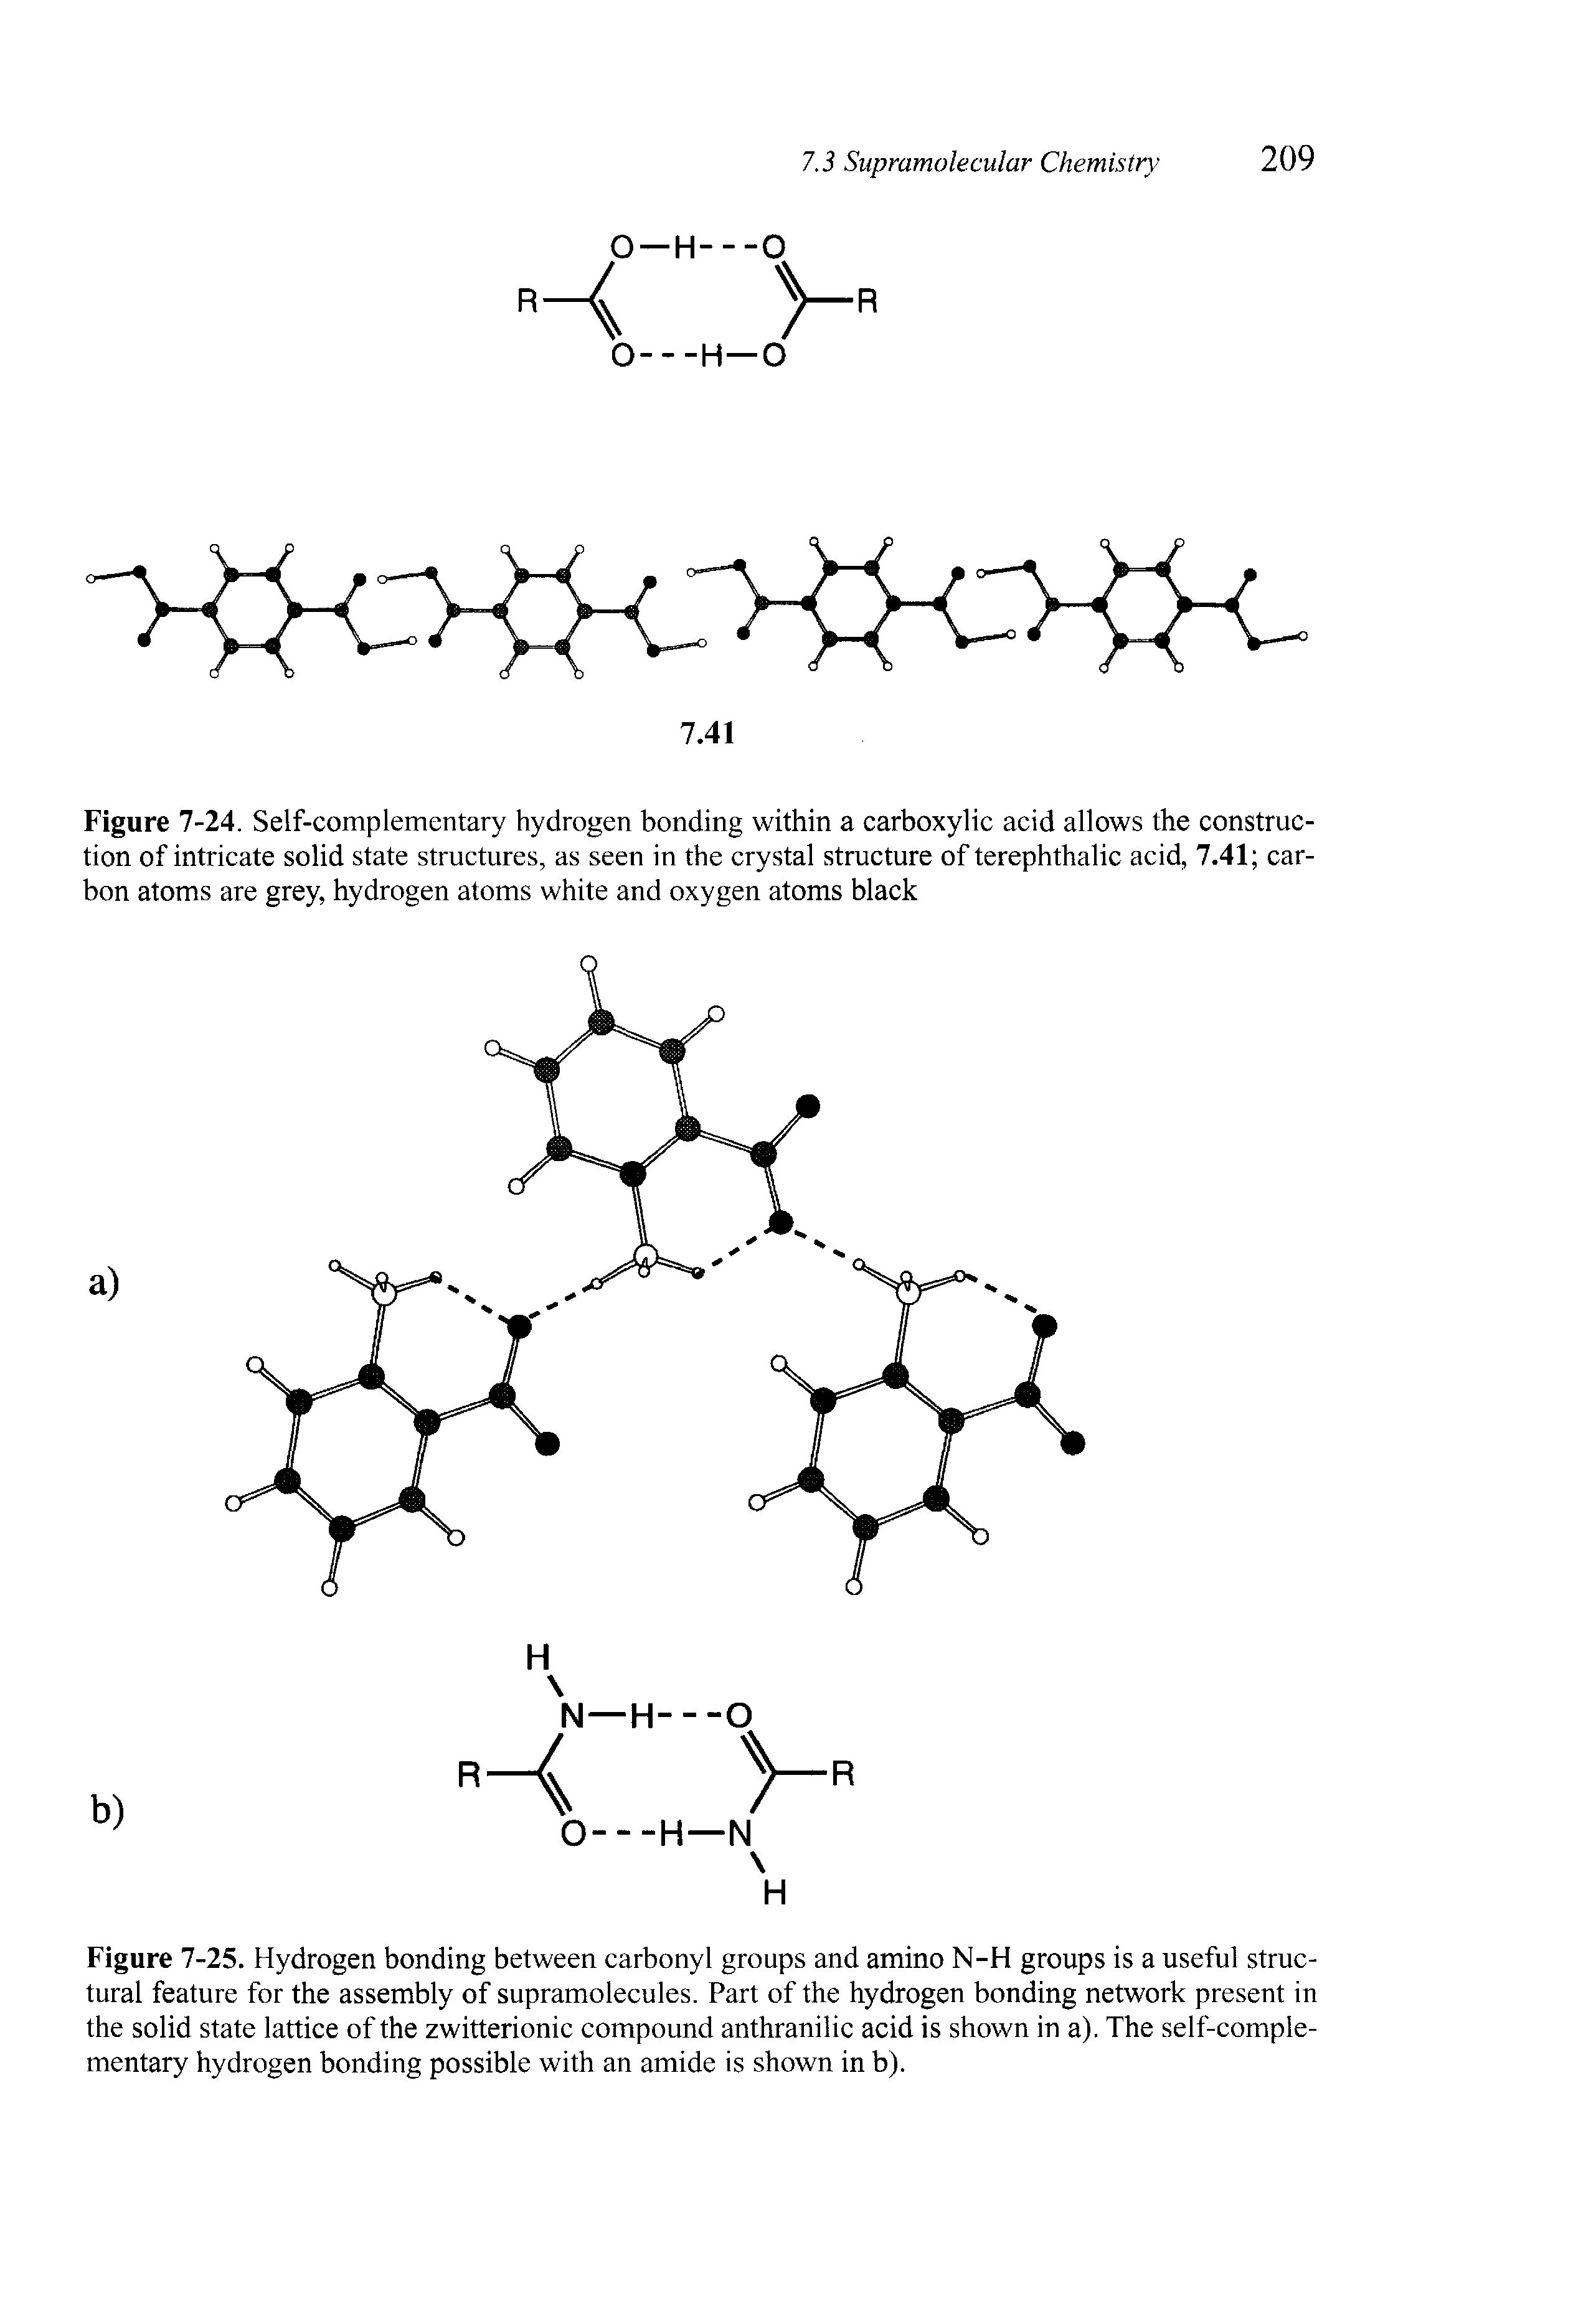 Figure 7-24. Self-complementary hydrogen bonding within a carboxylic acid allows the construction of intricate solid state structures, as seen in the crystal structure of terephthalic acid, 7.41 carbon atoms are grey, hydrogen atoms white and oxygen atoms black...